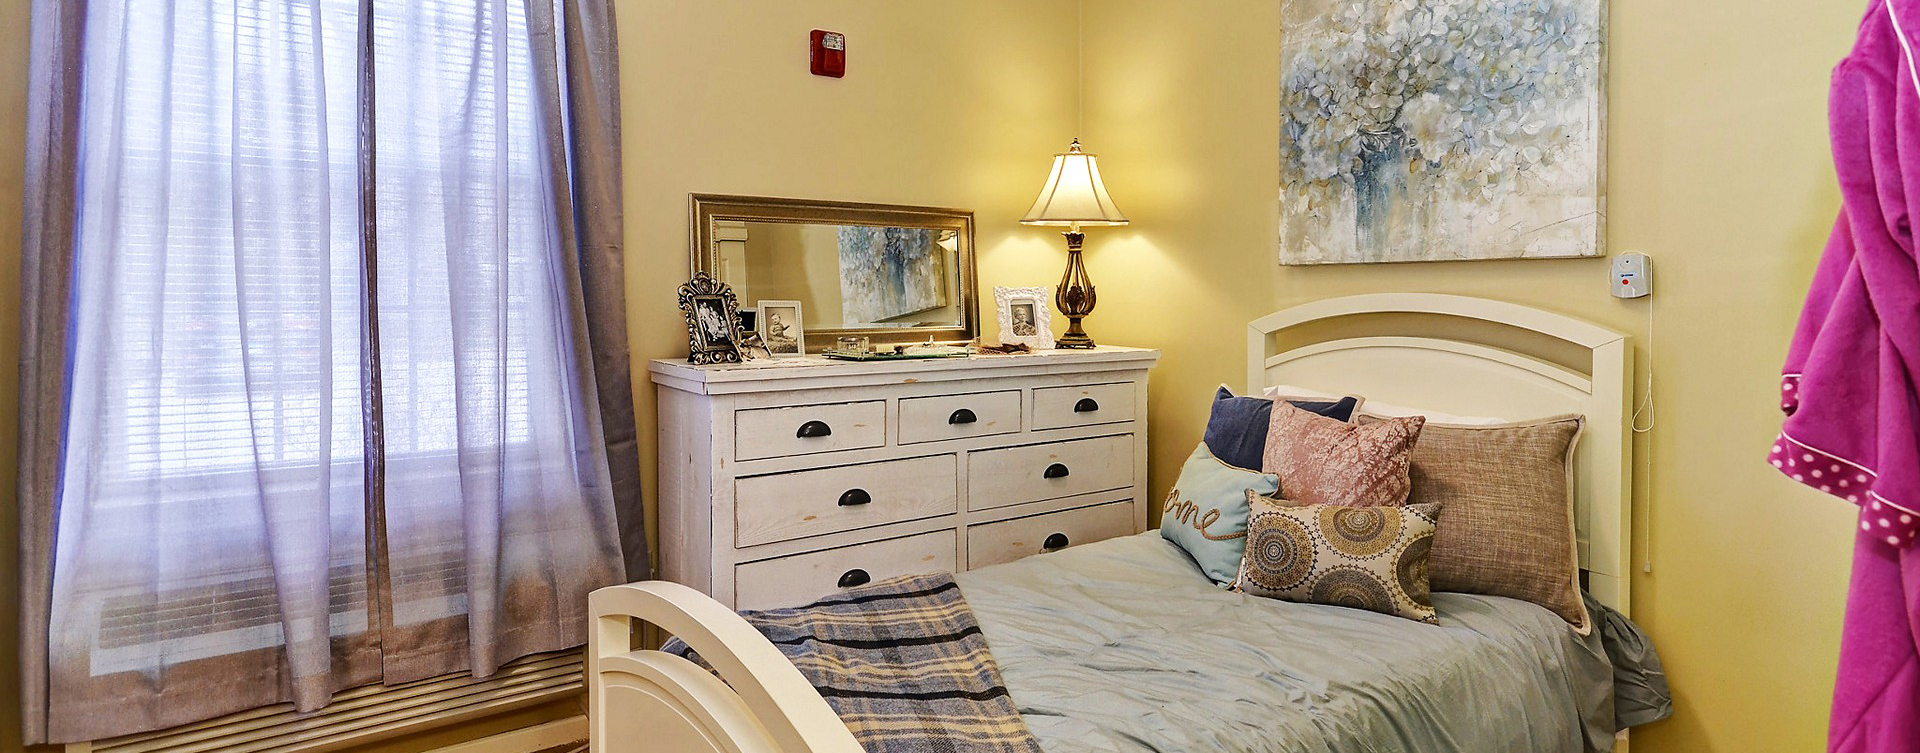 Get a new lease on life with a cozy apartment at Bickford of Crystal Lake